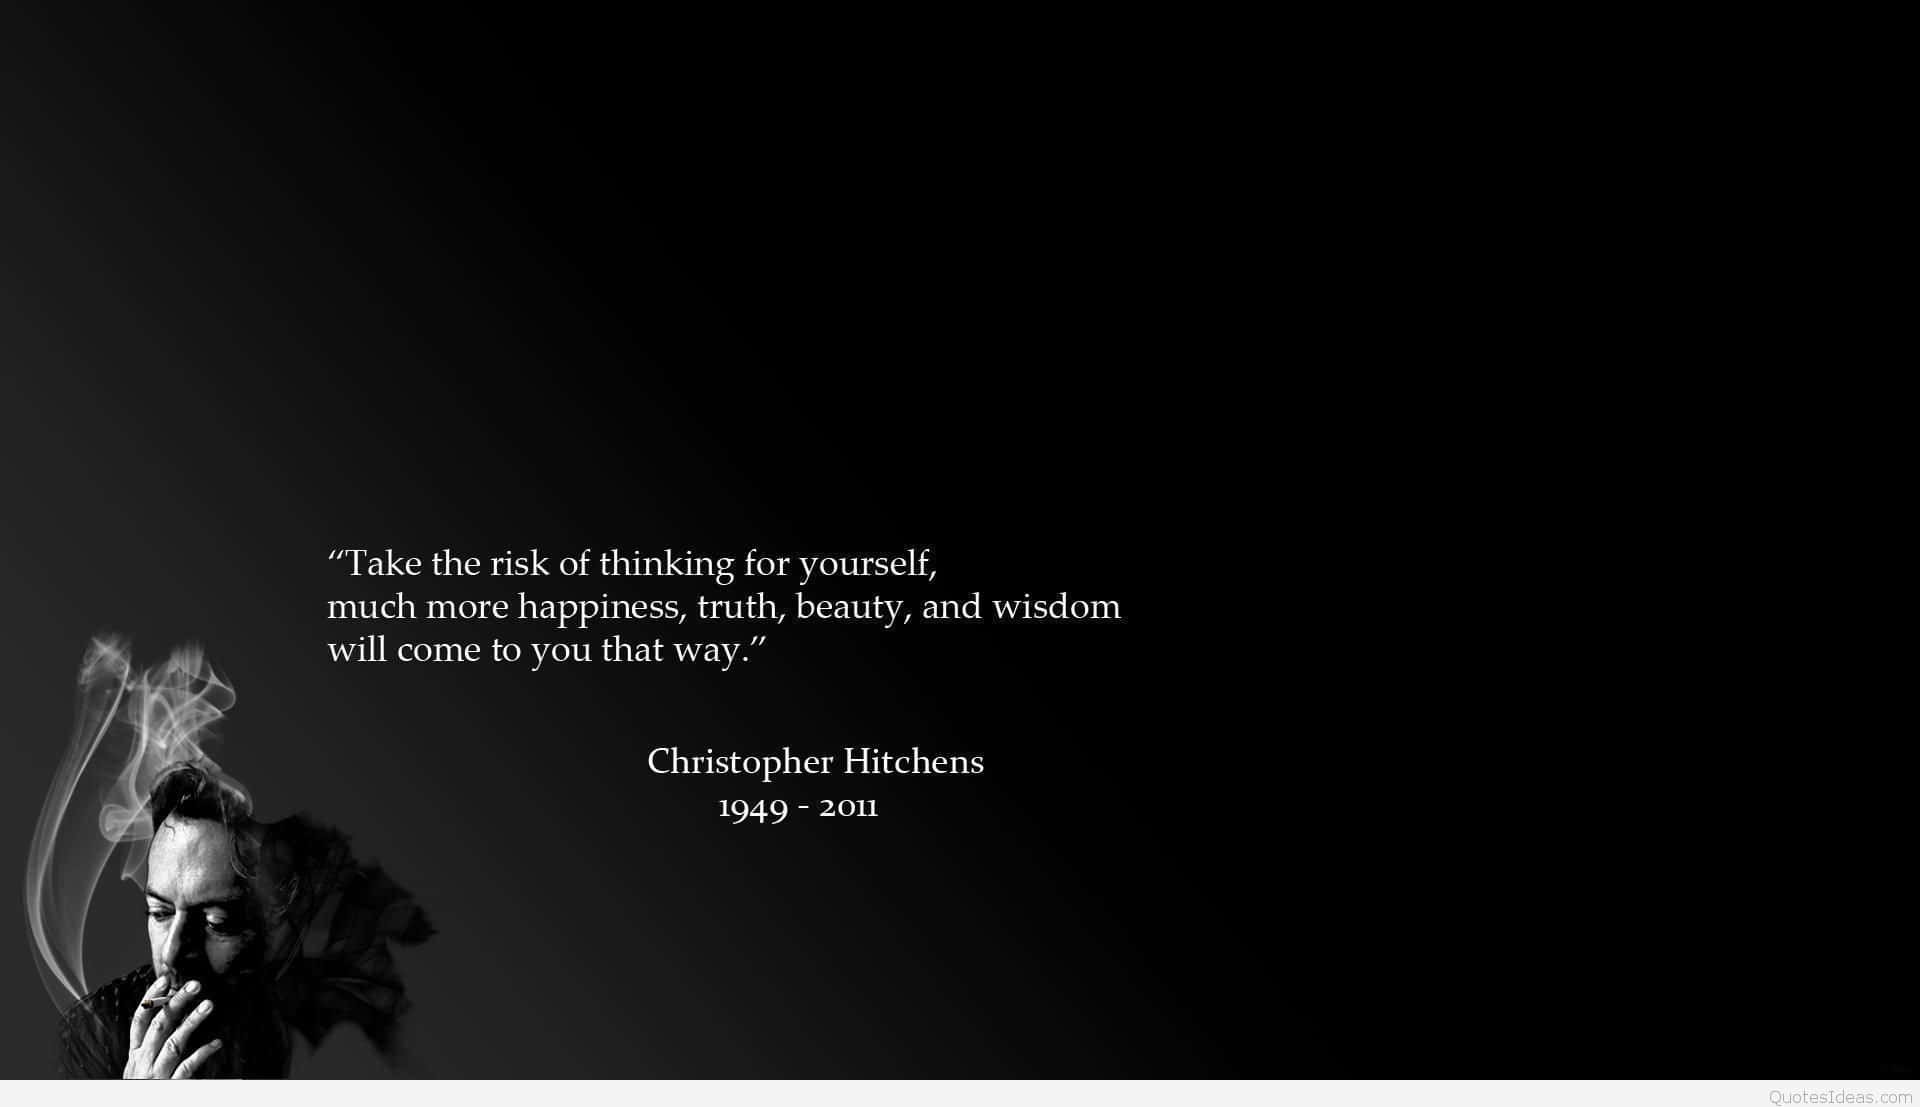 Thinkingfor Yourself Quoteby Christopher Hitchens Wallpaper